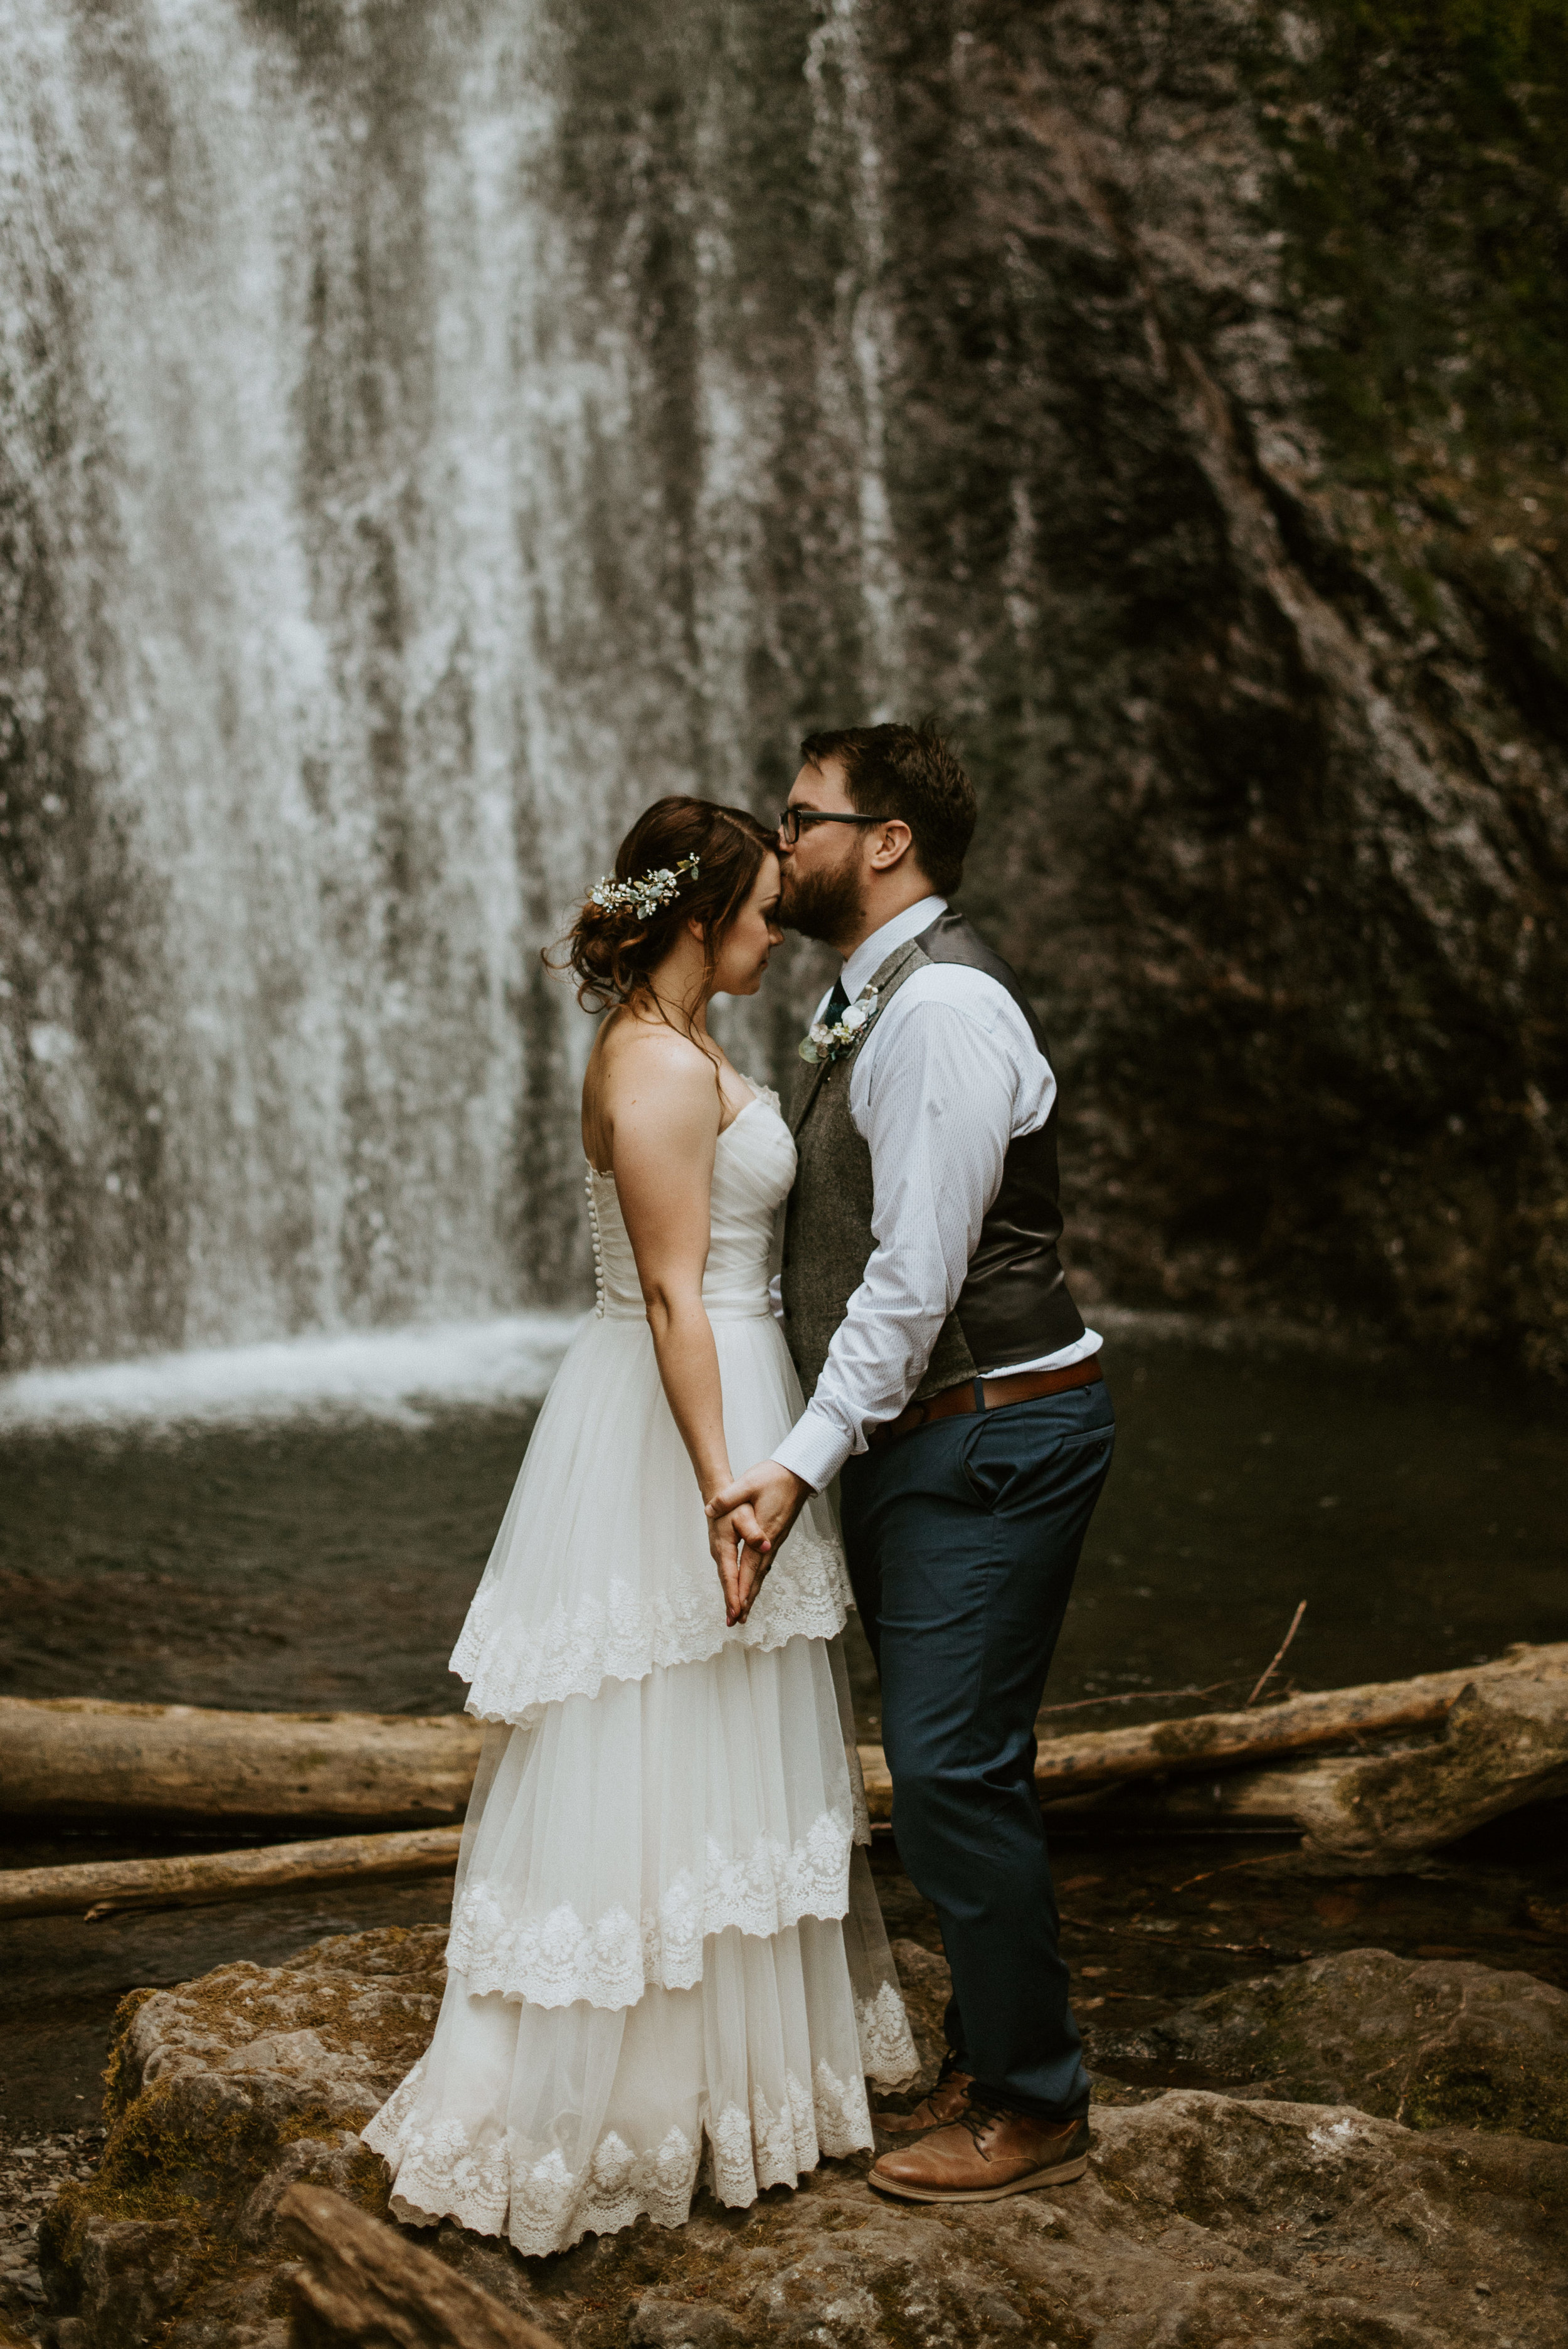 Chelsie + Matt's Marymere Falls Elopement at Olympic National Park by Kamra Fuller Photography